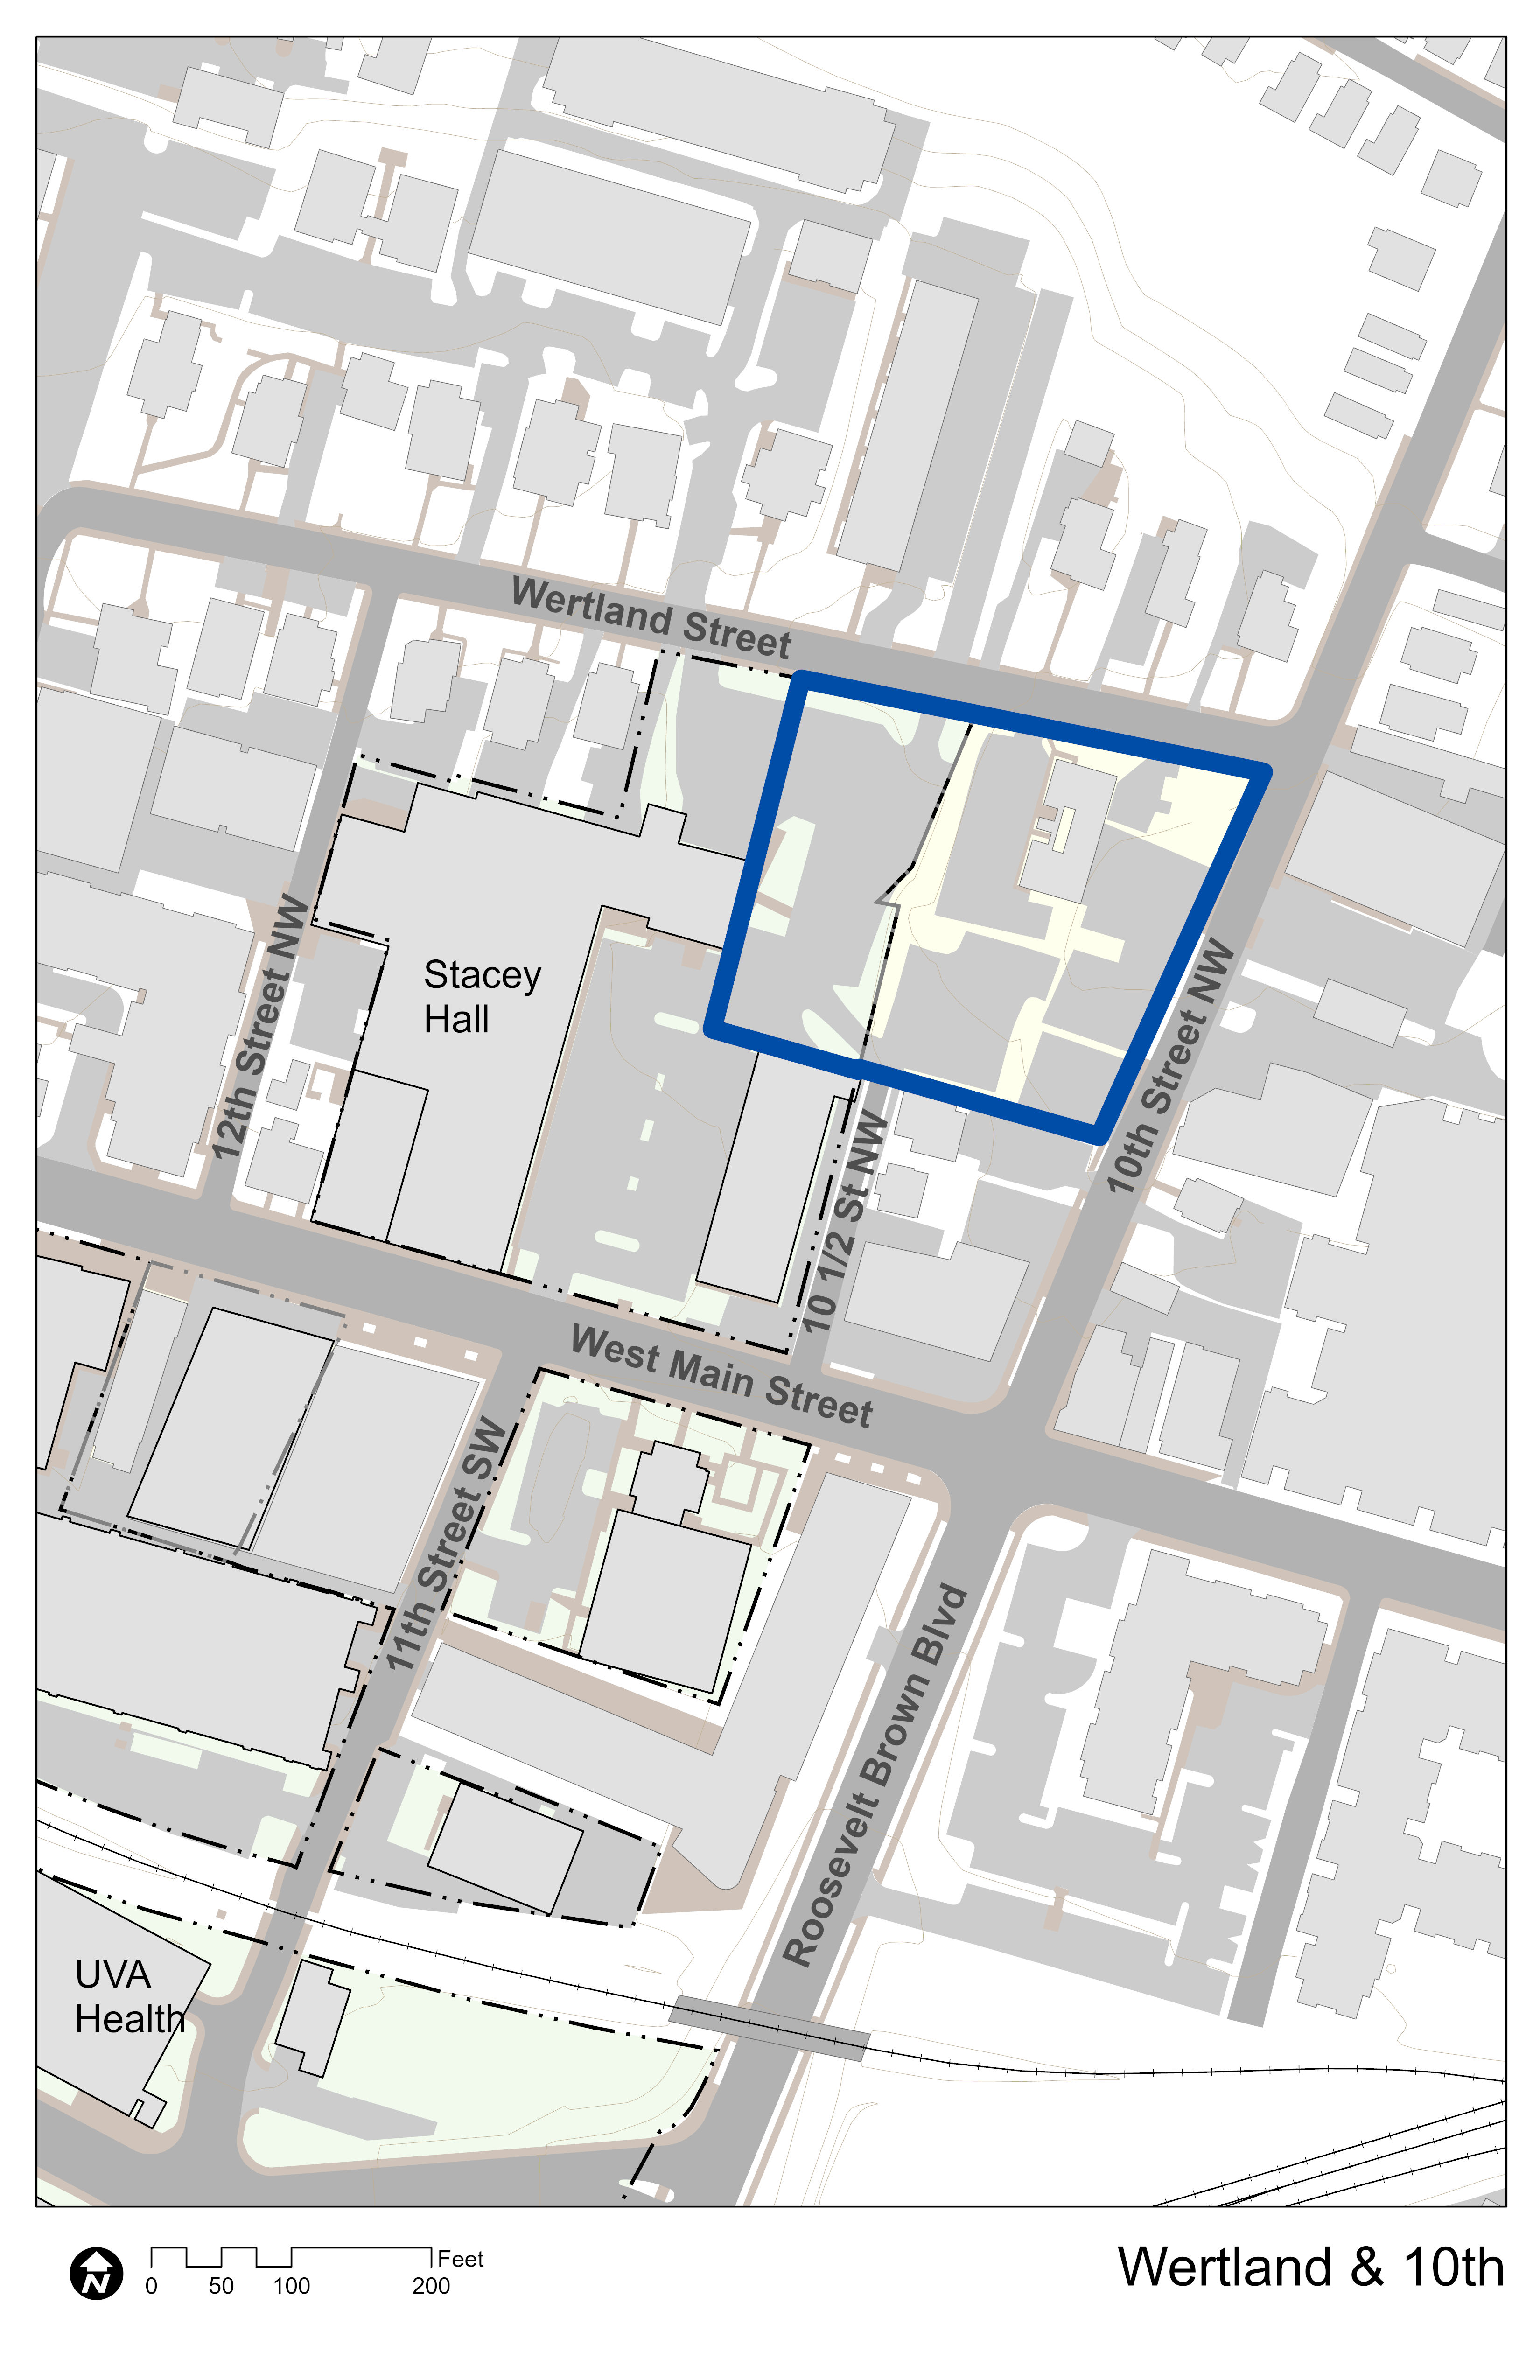 Map of Wertland and 10th site with labels